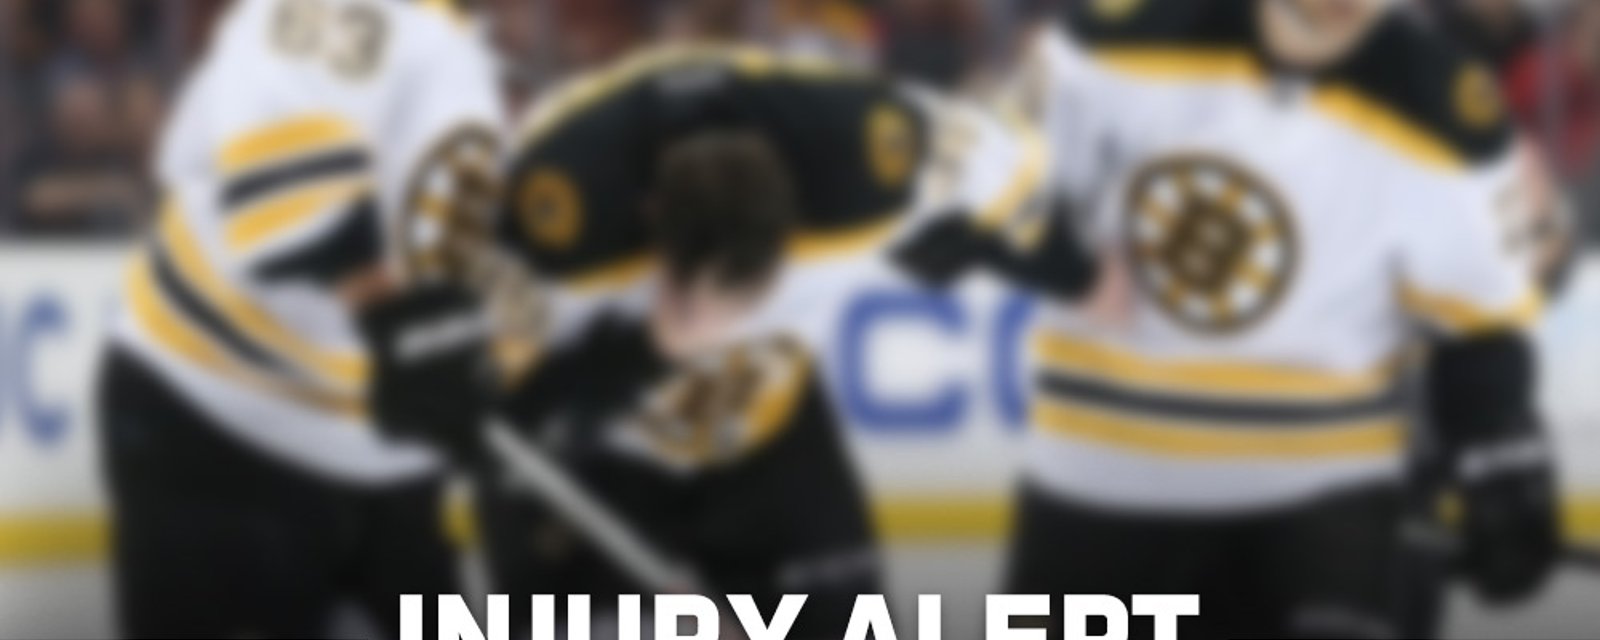 BREAKING: Another injury